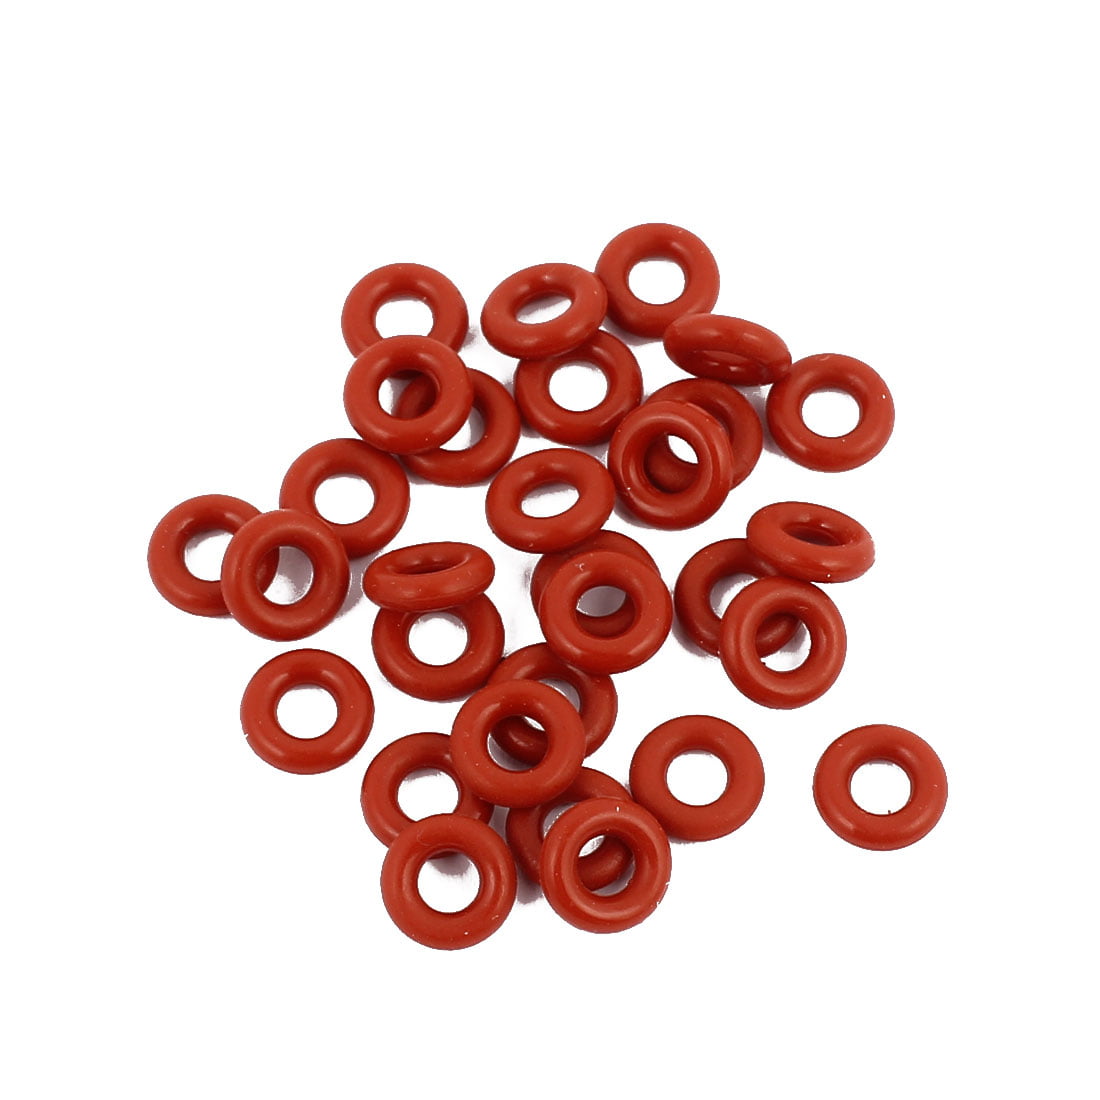 Red 1.5mm Cross Section O-Ring Sealing Washers Gasket,Food Grade Silicone Rubber 